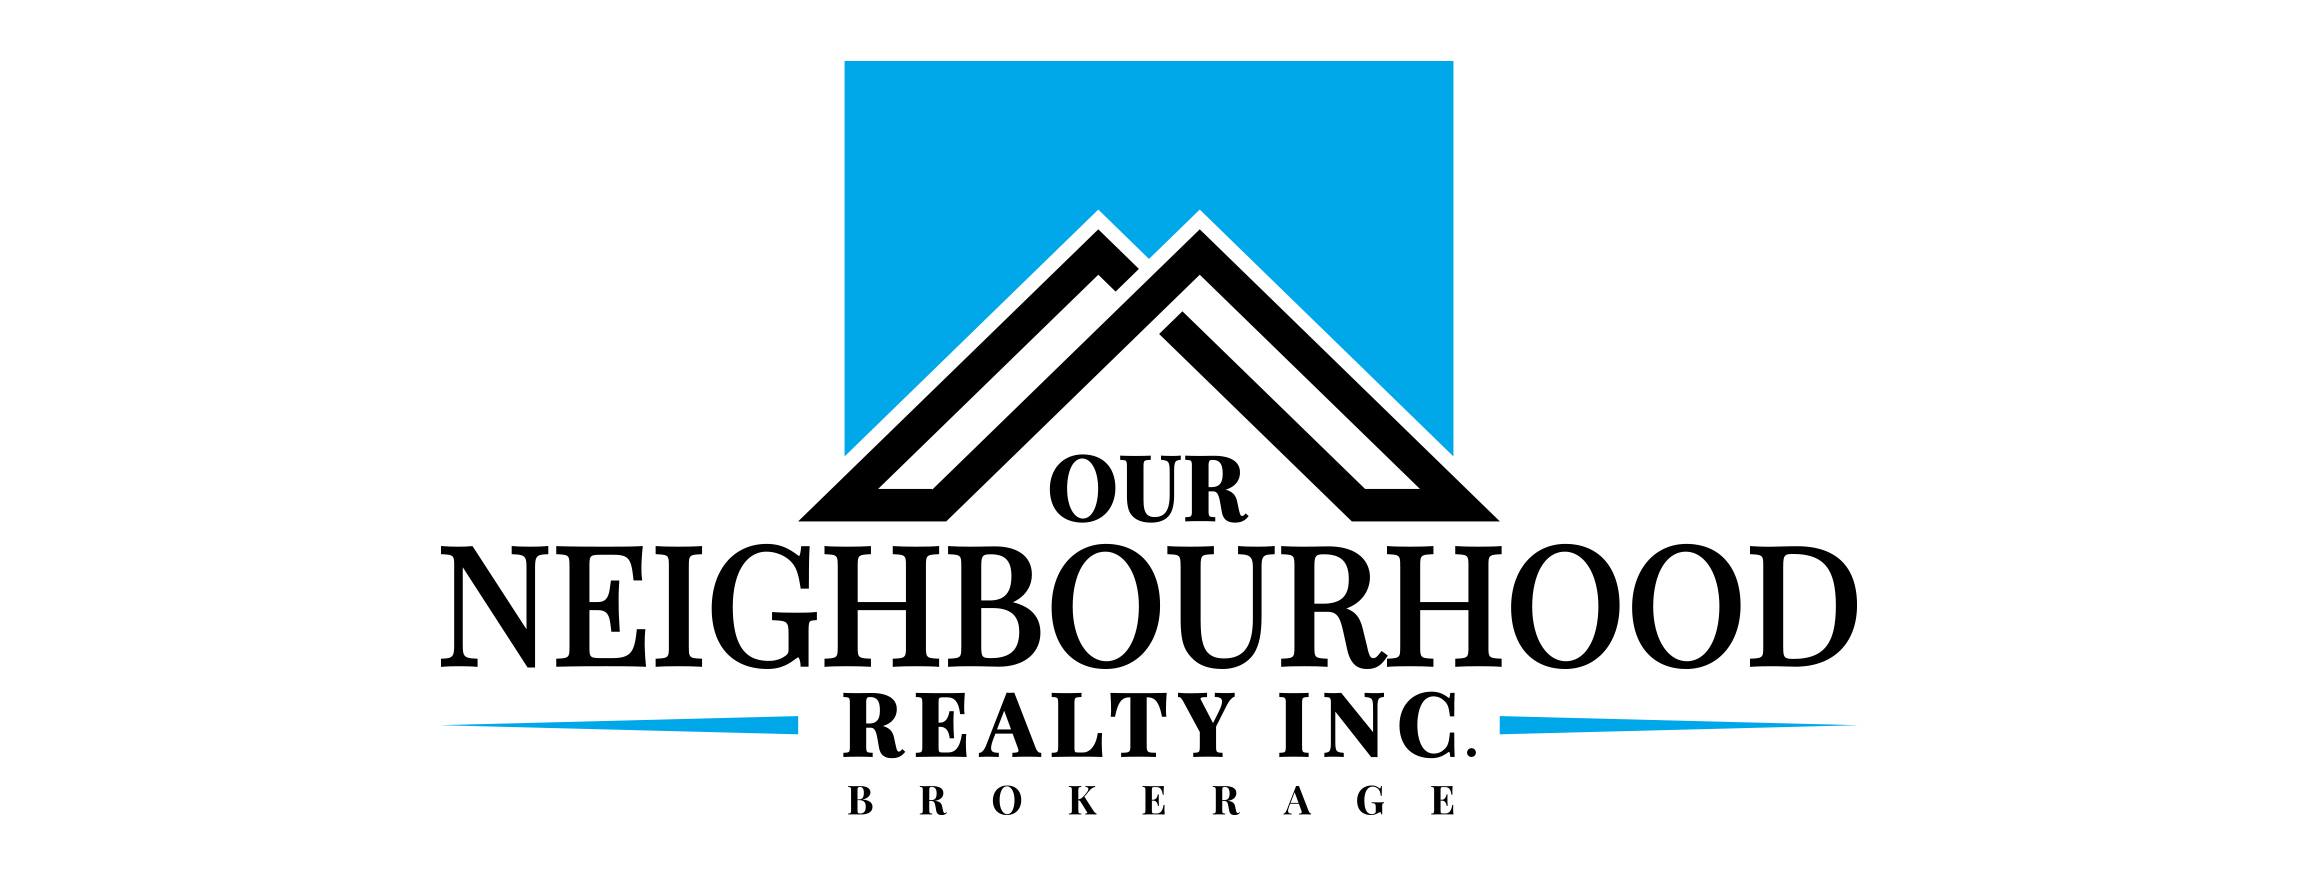 Searching for listings in Cobourg